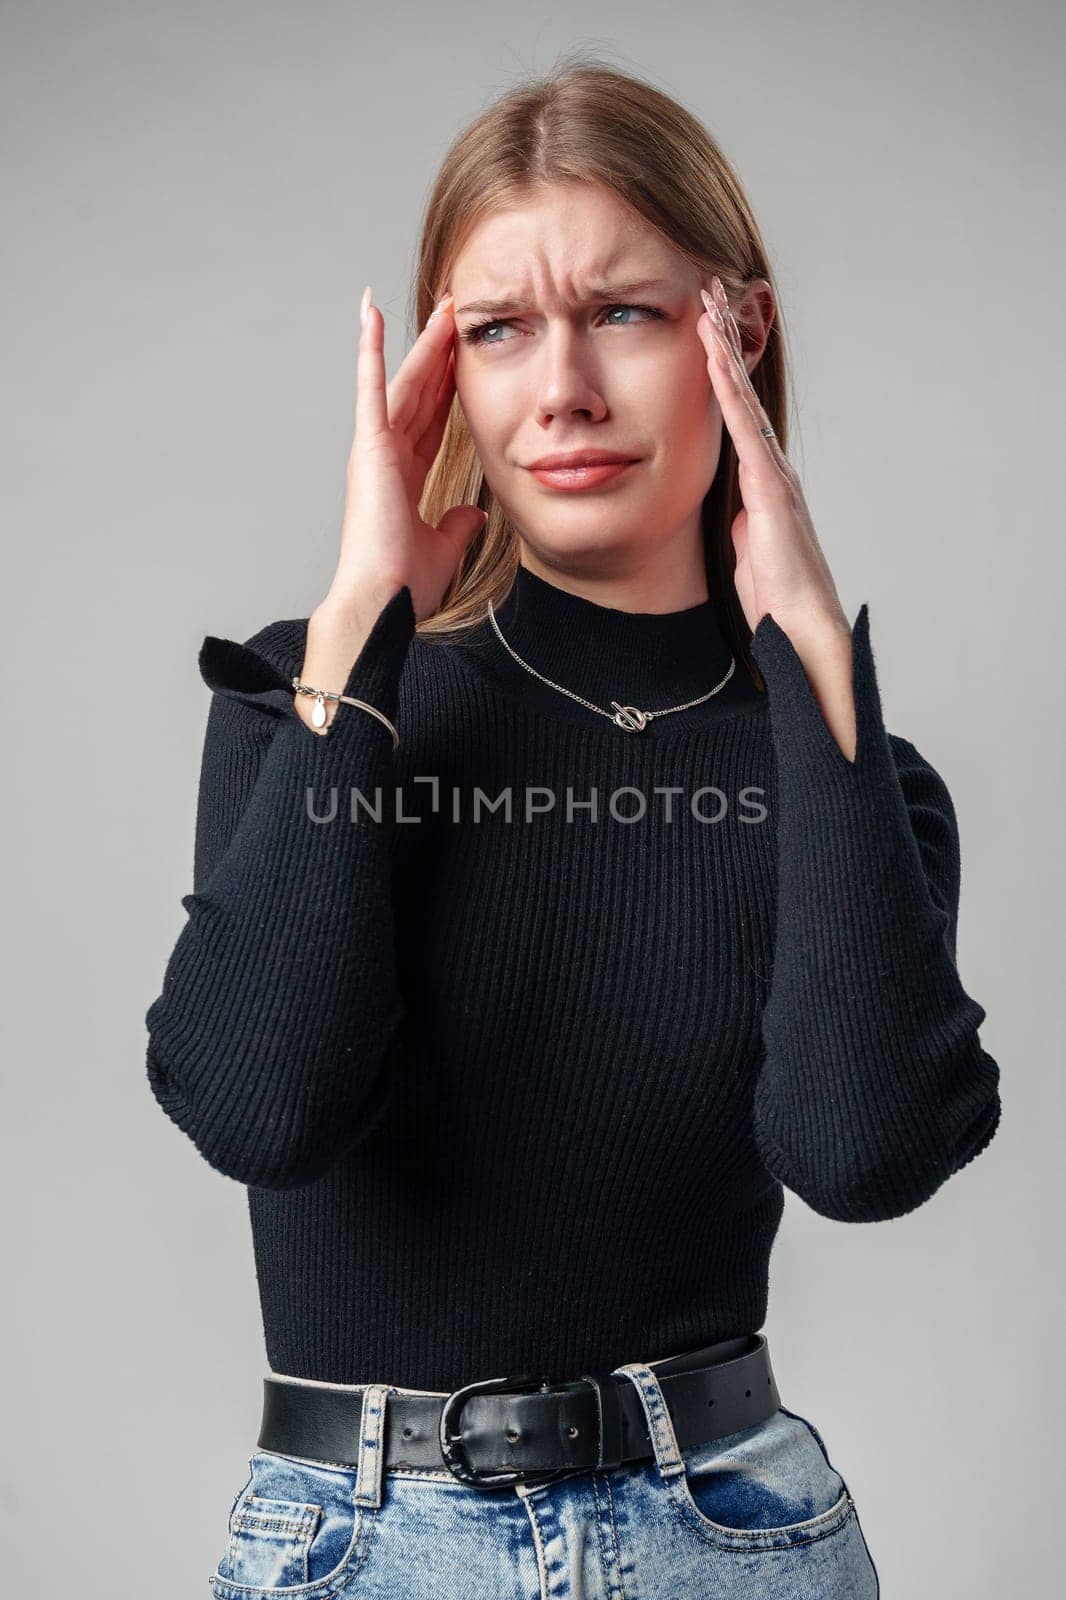 Young Woman In Black Shirt Expressing Discontent Against Grey Background close up